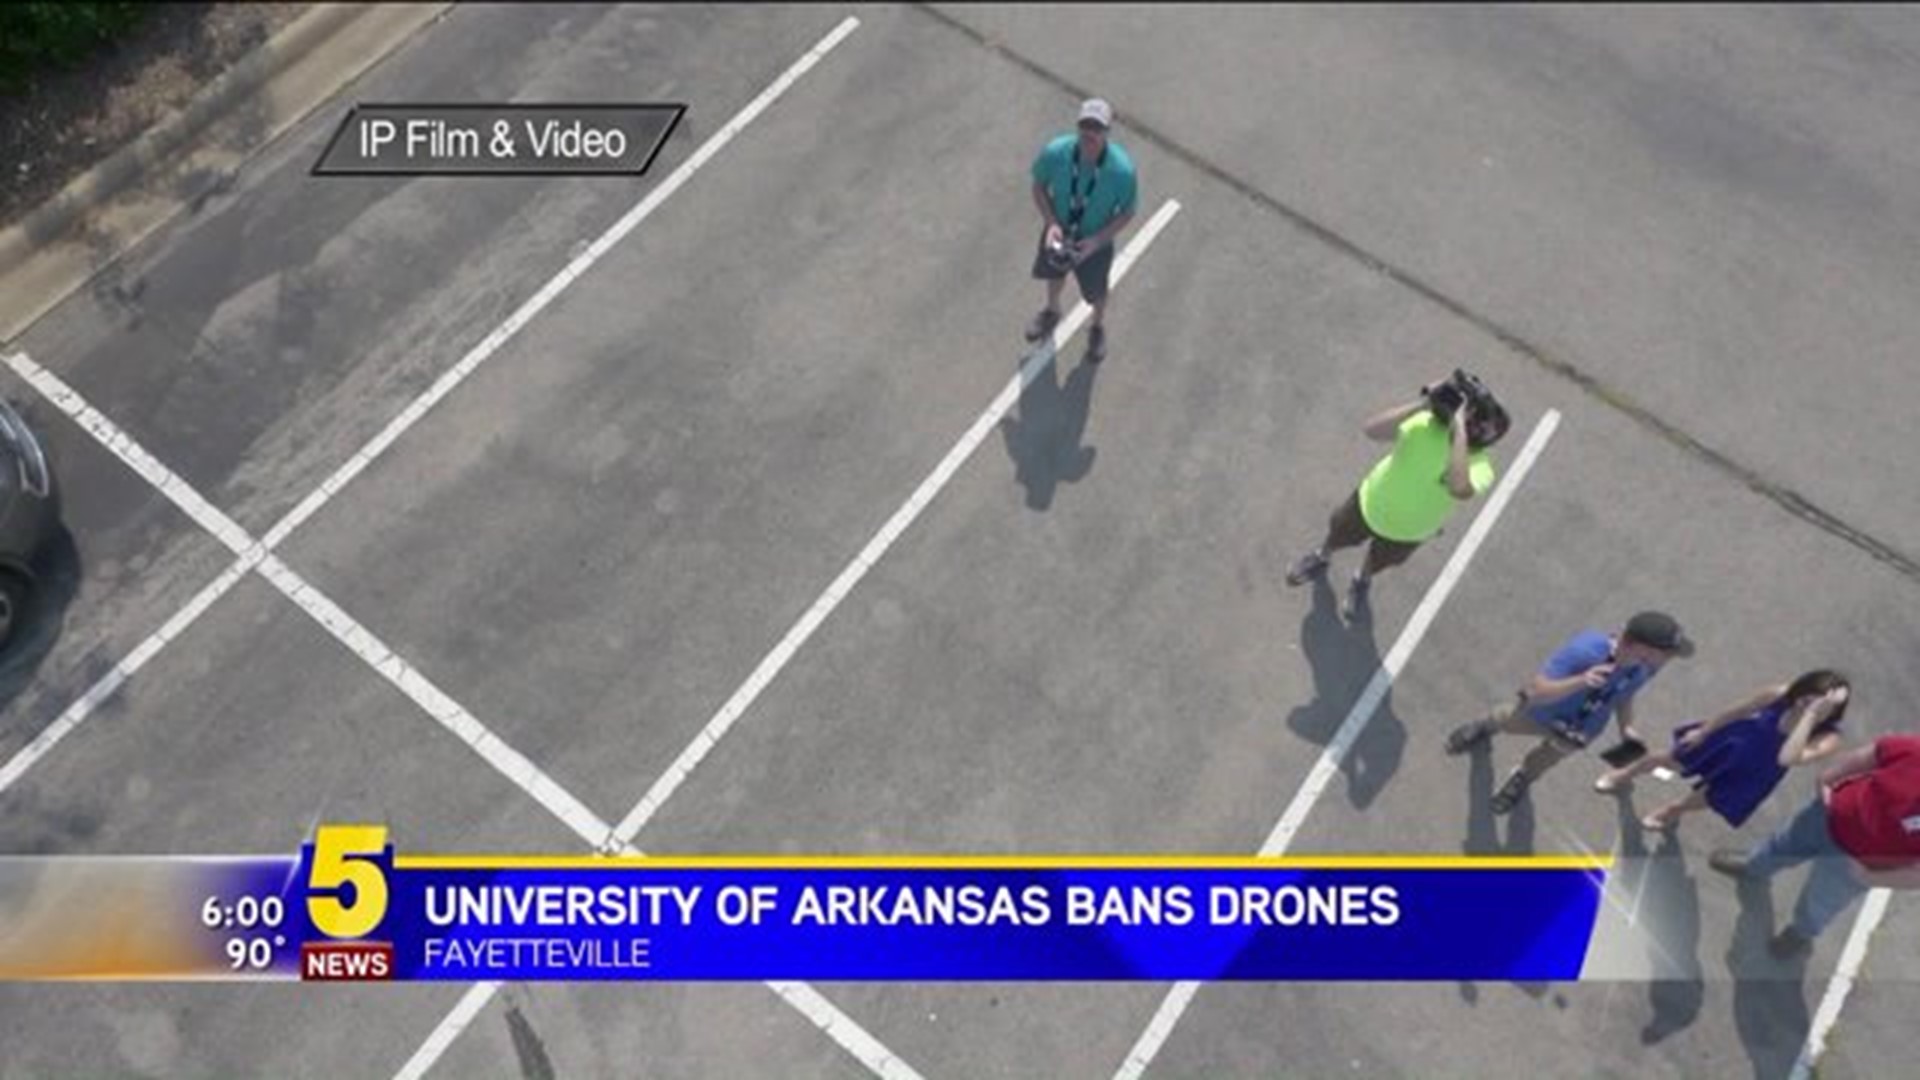 Drones Prohibited On Campus